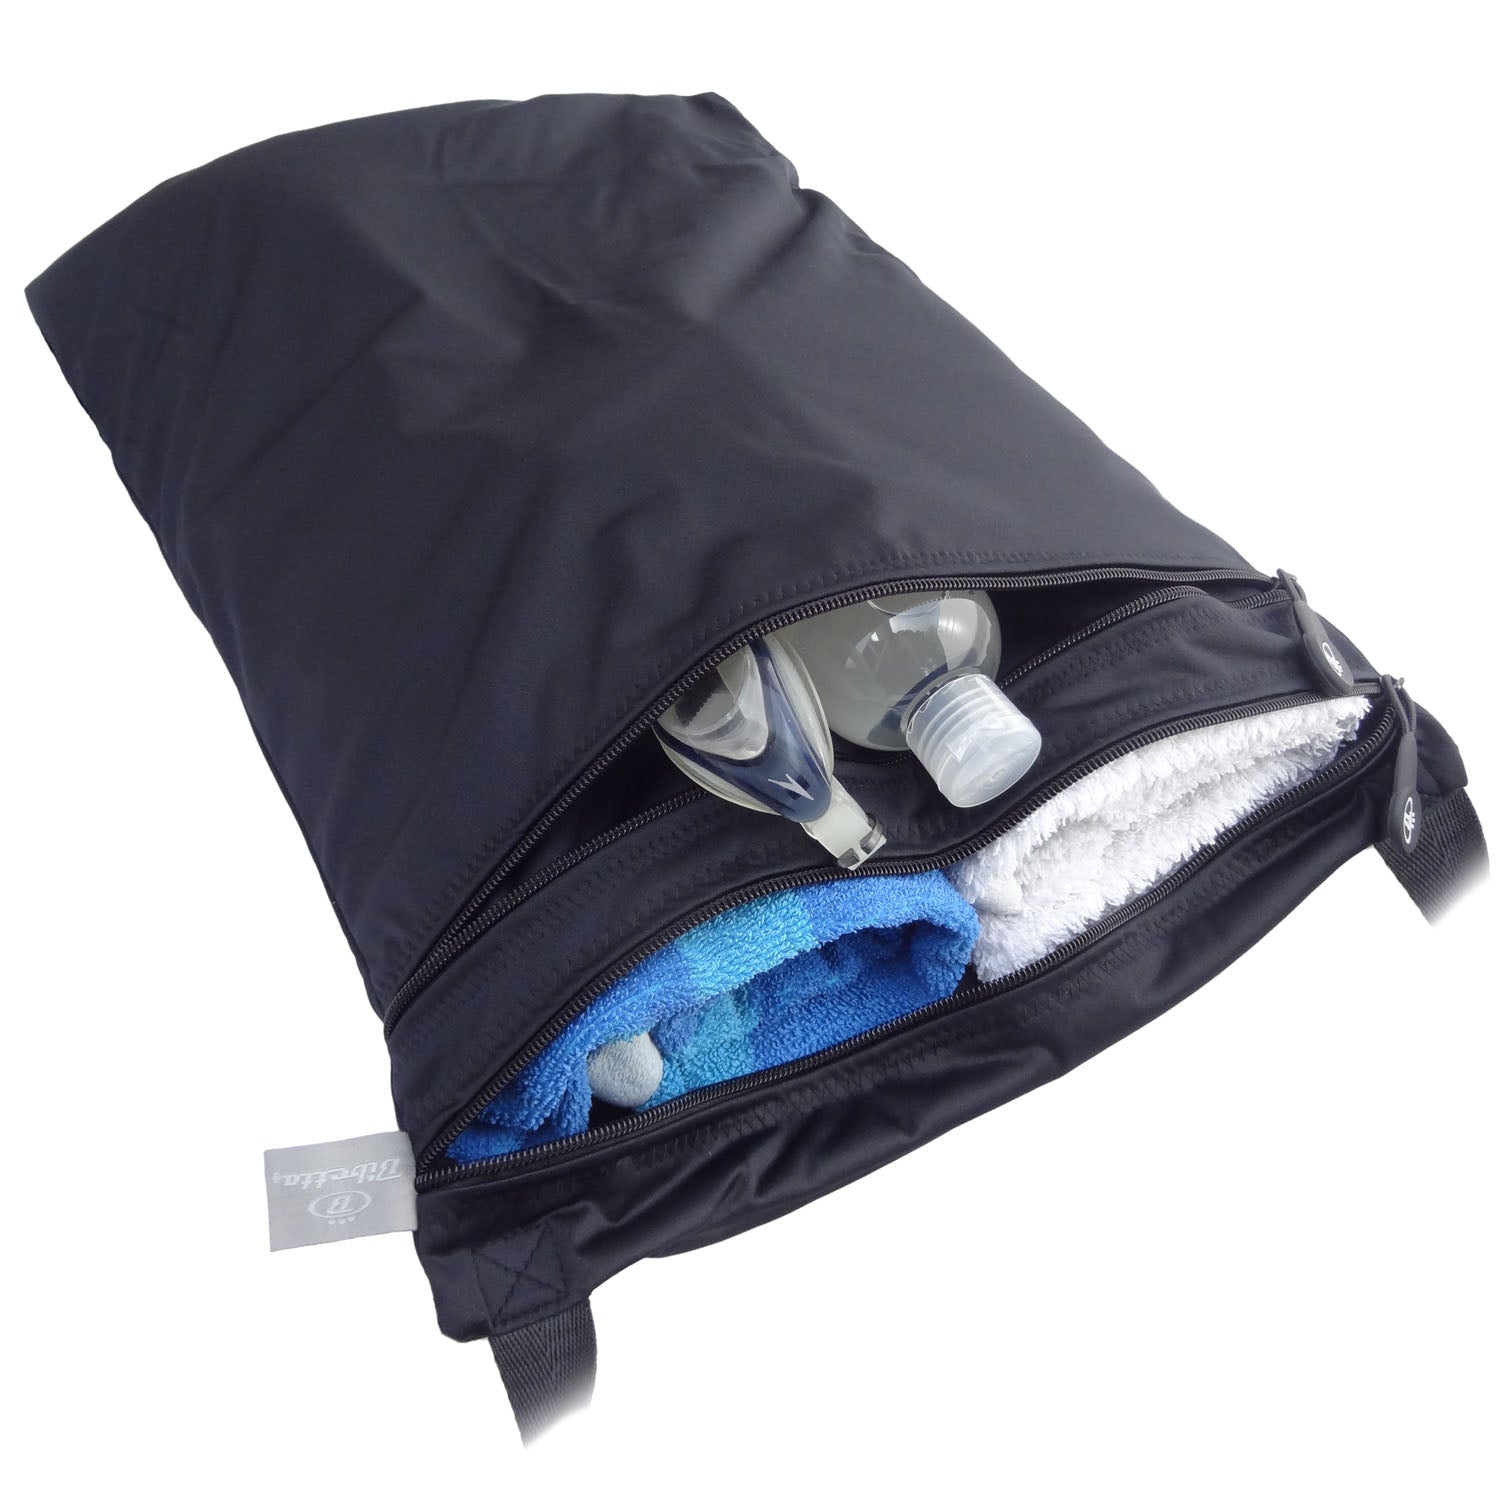 Wet and Dry Waterproof Bag - Black (UK VAT Exempt) | Incontinence Aids | Care Designs